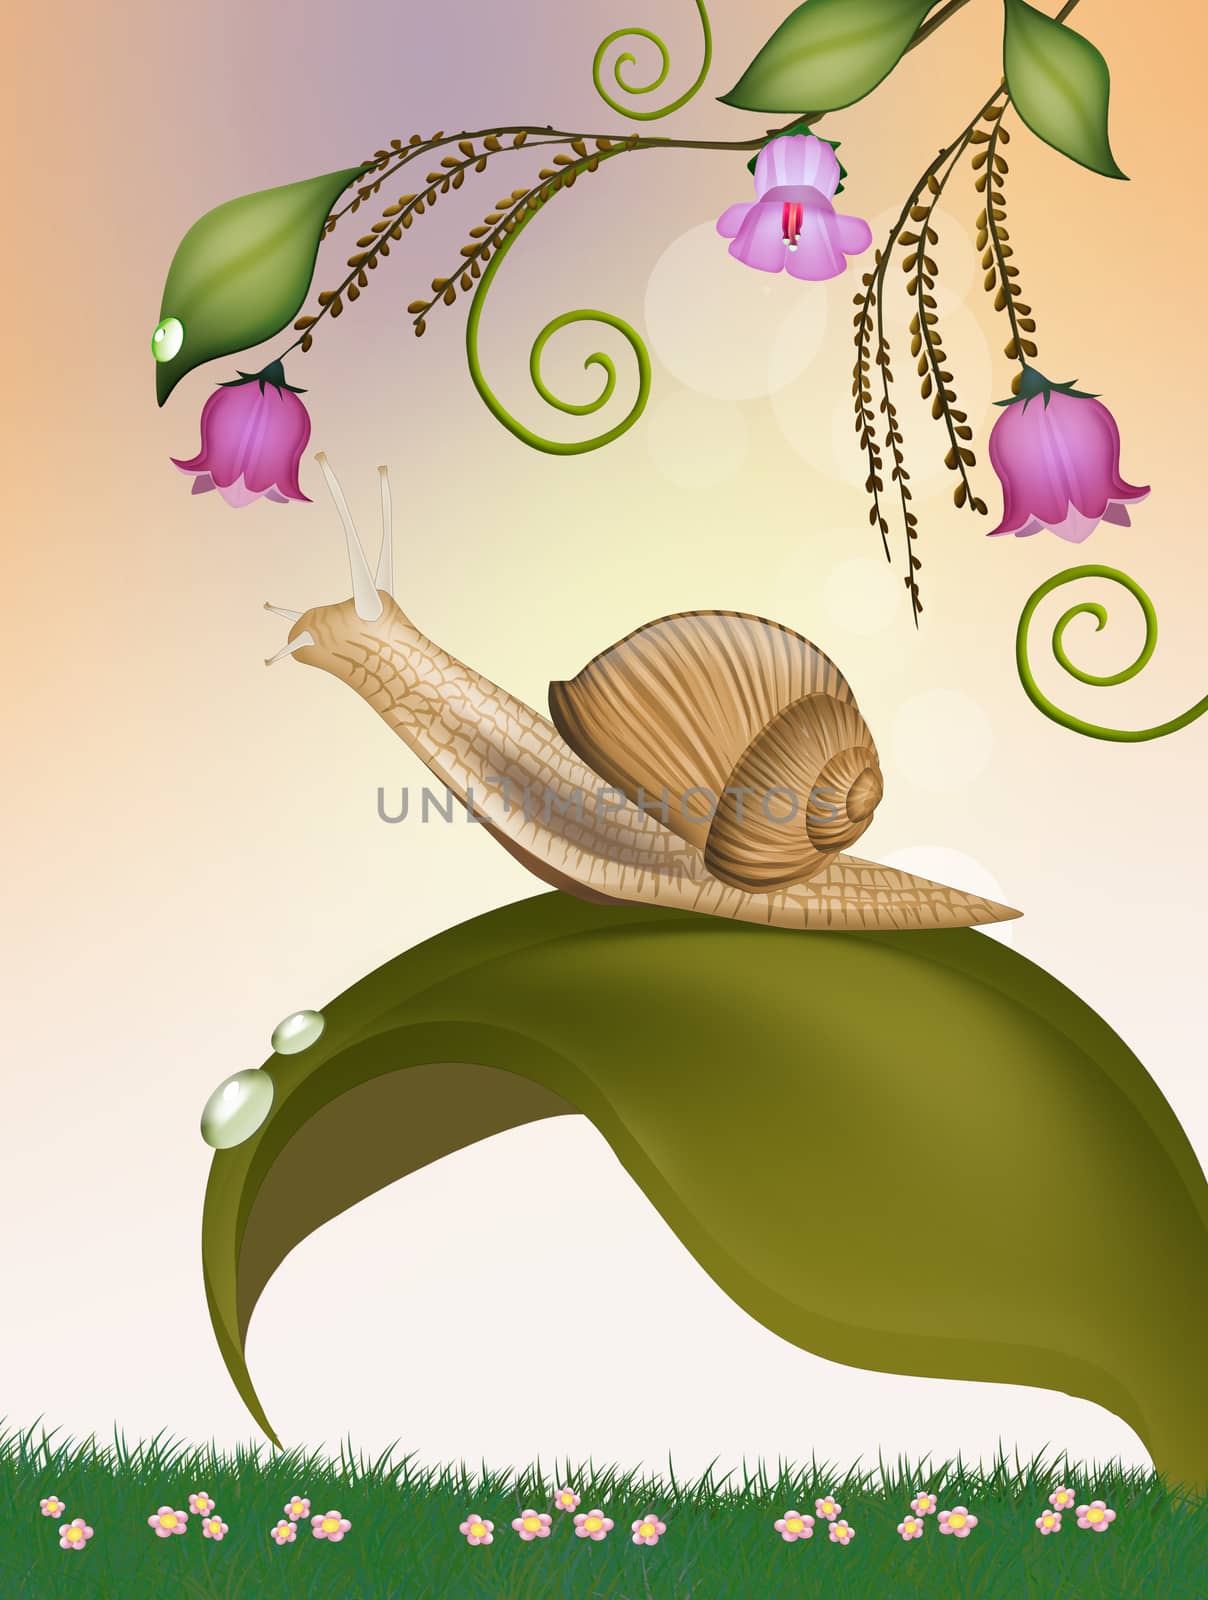 snail on the leaf by adrenalina